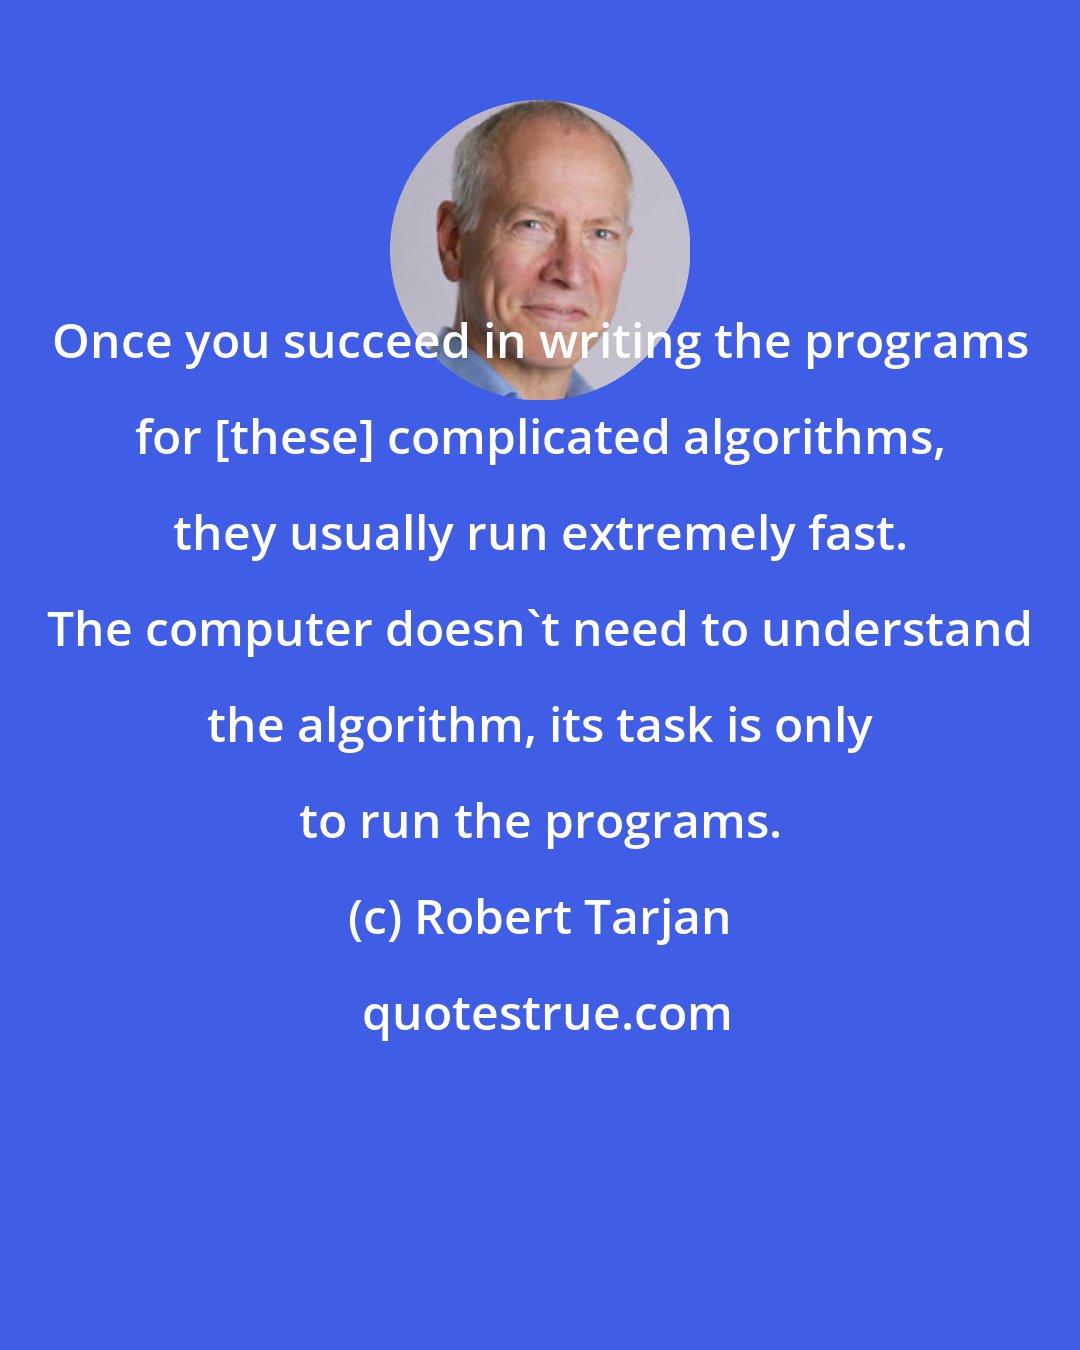 Robert Tarjan: Once you succeed in writing the programs for [these] complicated algorithms, they usually run extremely fast. The computer doesn't need to understand the algorithm, its task is only to run the programs.